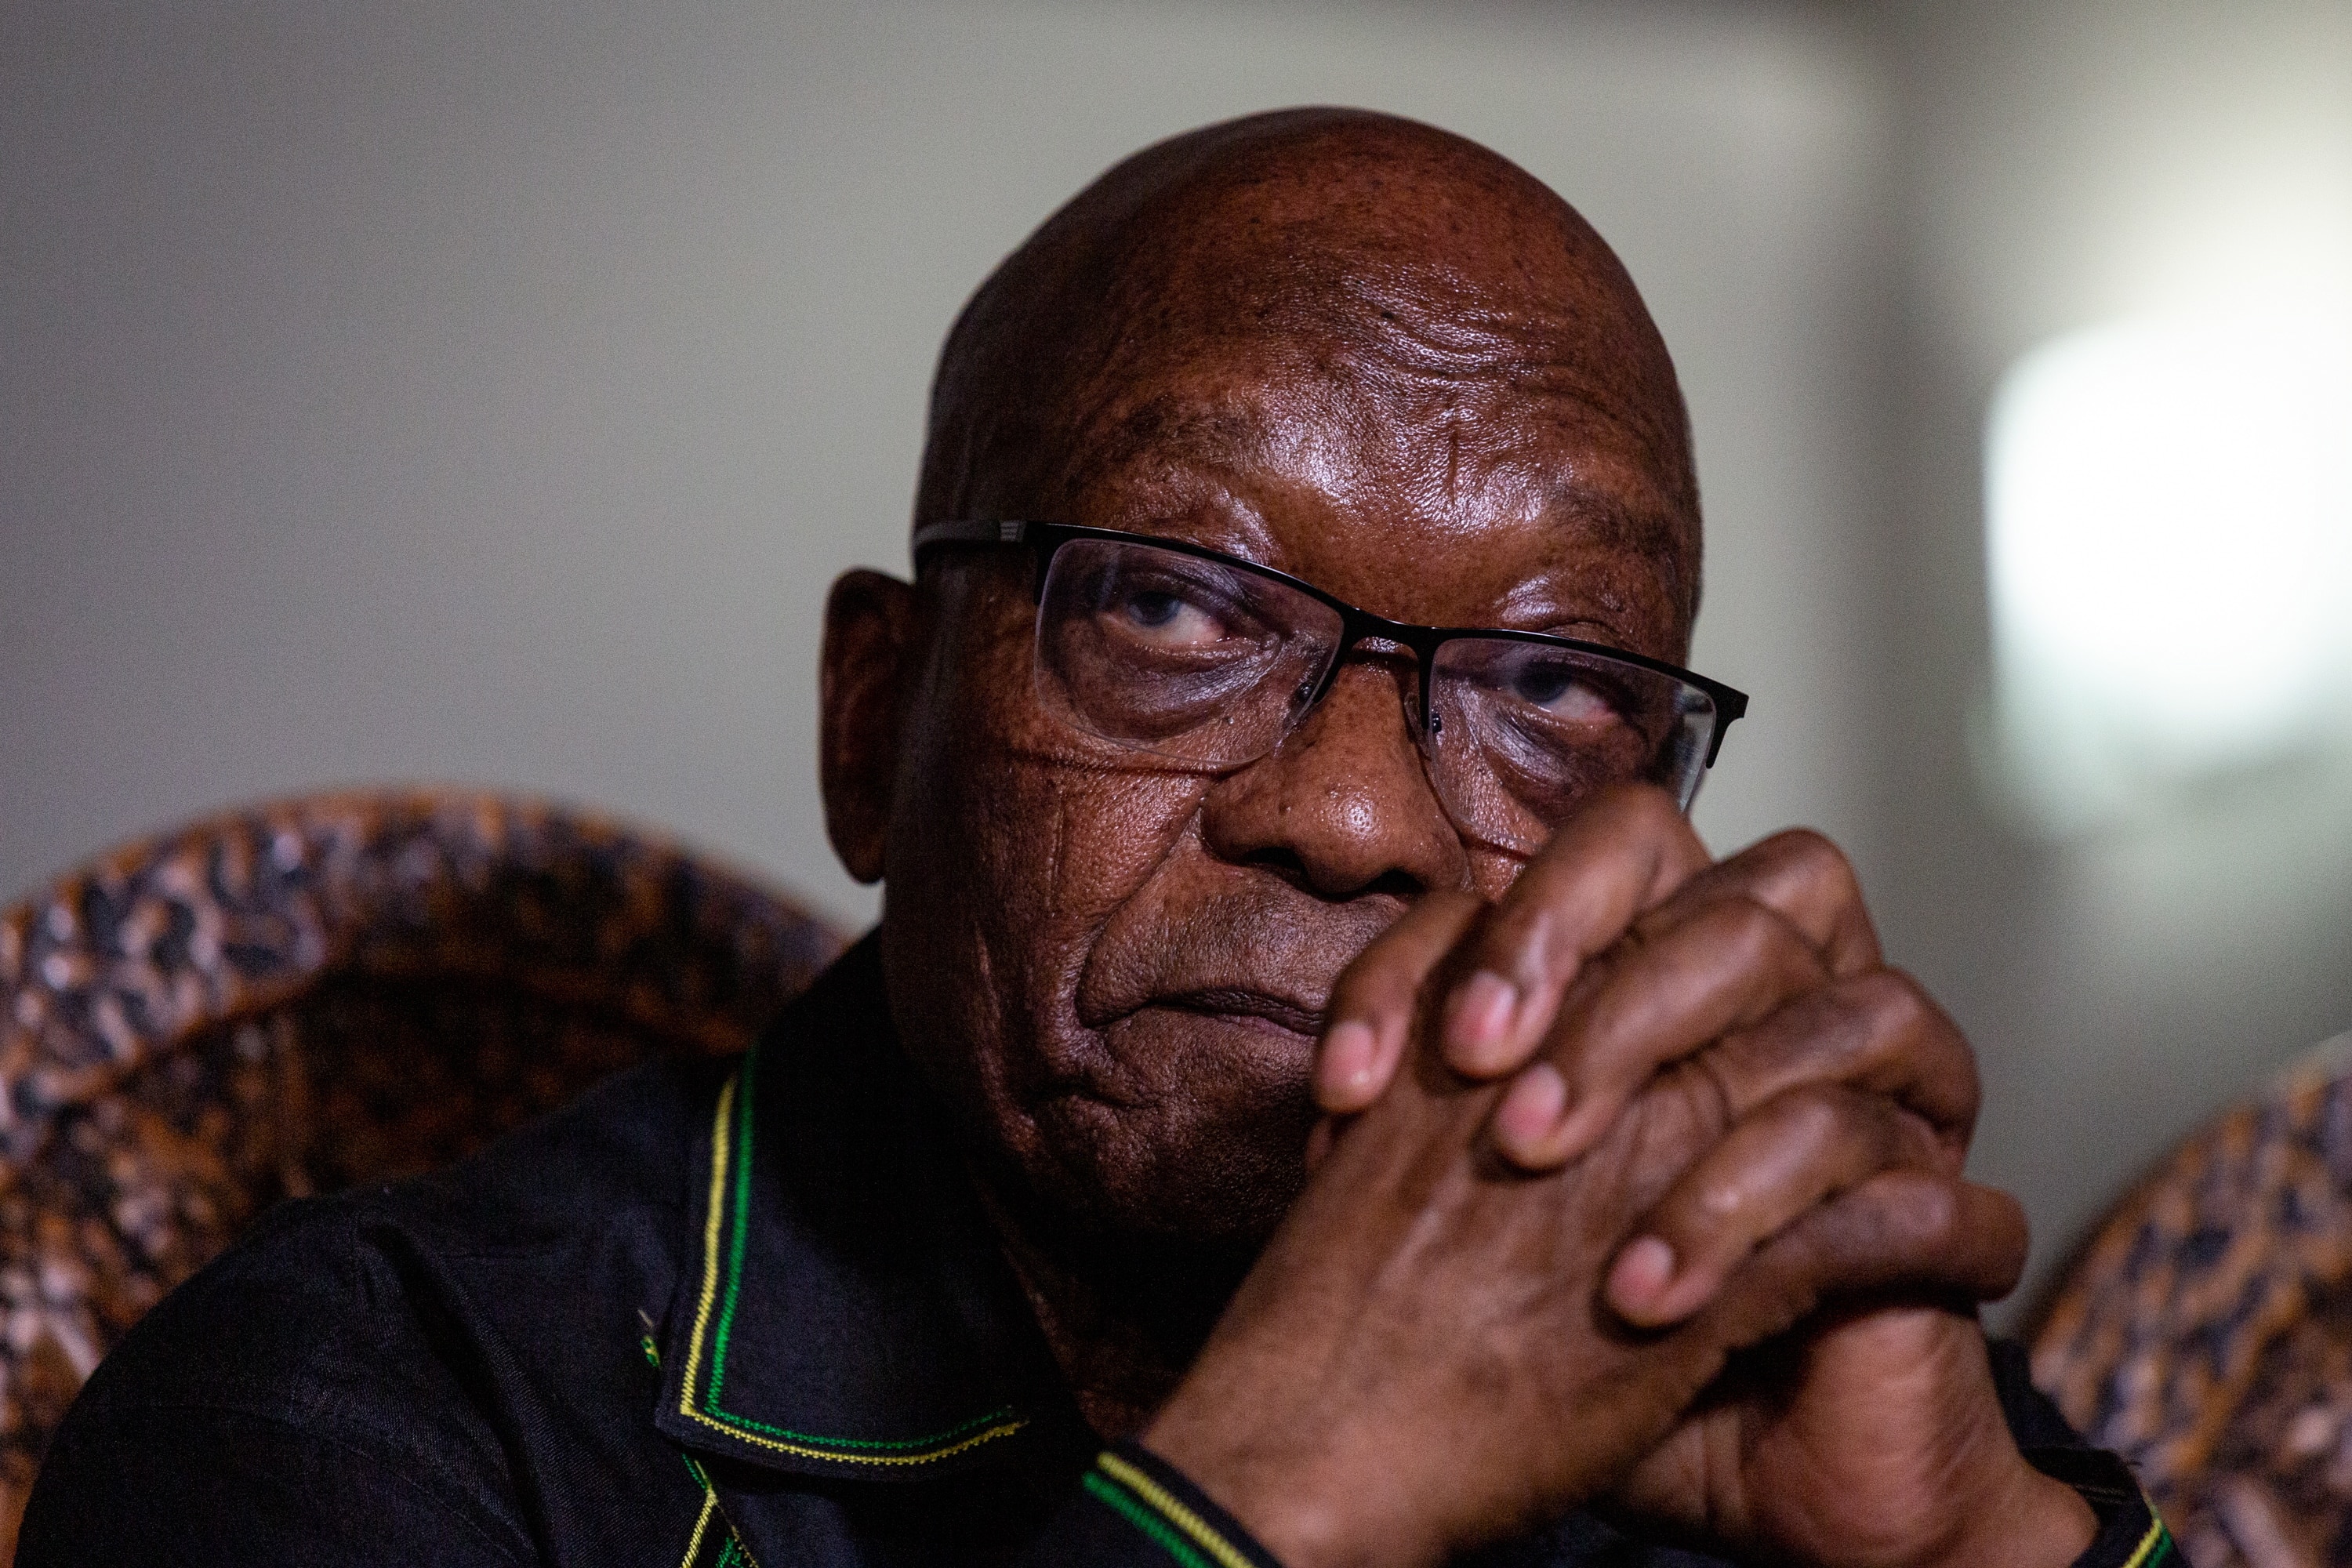 epa09330731 (FILE) - Former South African President Jacob Zuma speaks during a press conference in Nkandla, Kwa-Zulu Natal, South Africa, 04 July 2021 (reissued 08 July 2021). Zuma has handed himself in to police overnight and will be serving his first da